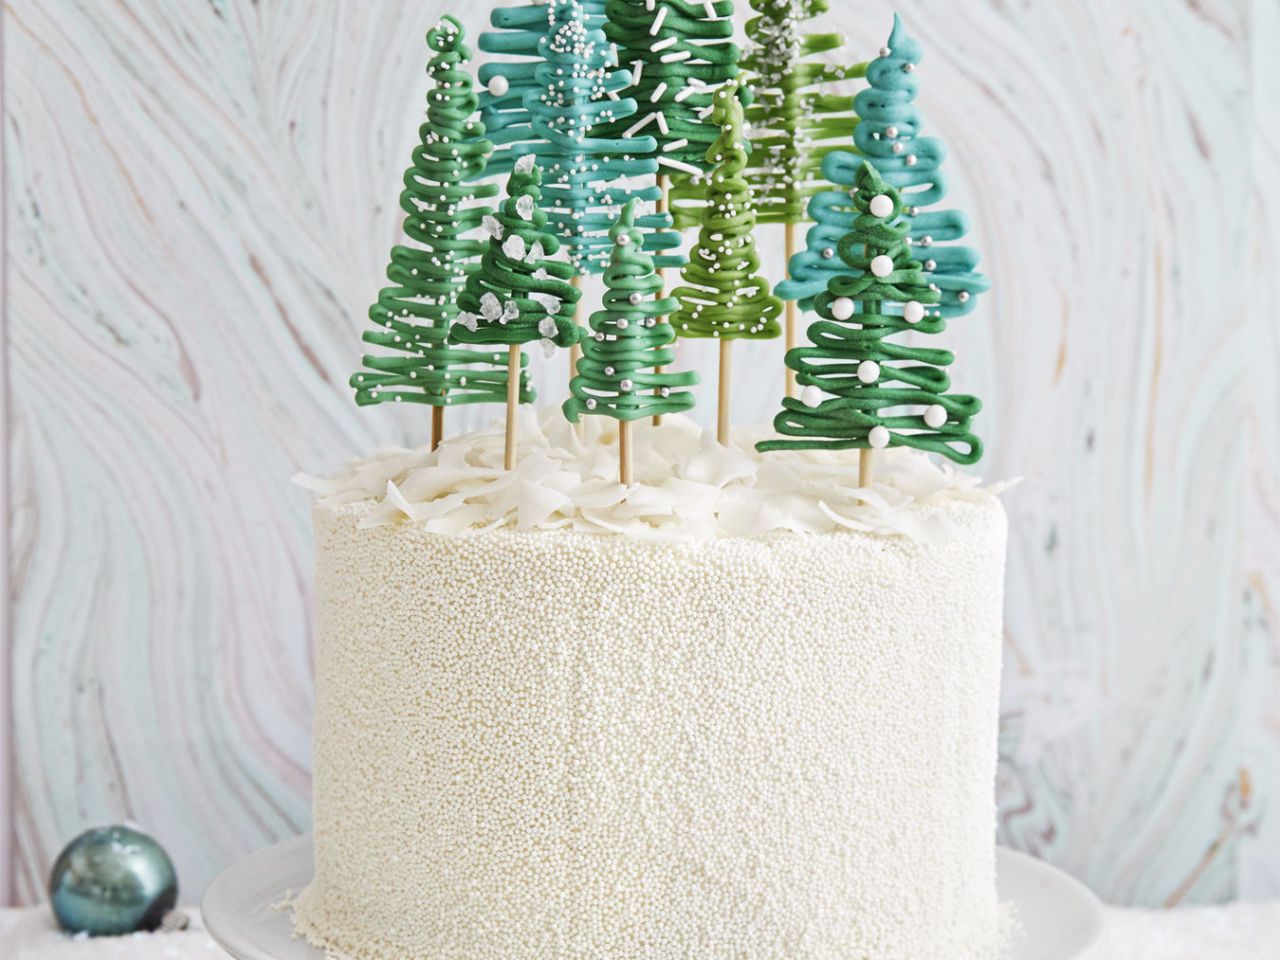 Pine Tree Forest Edible Cake Wrap or Cute Woodland Animals - Etsy